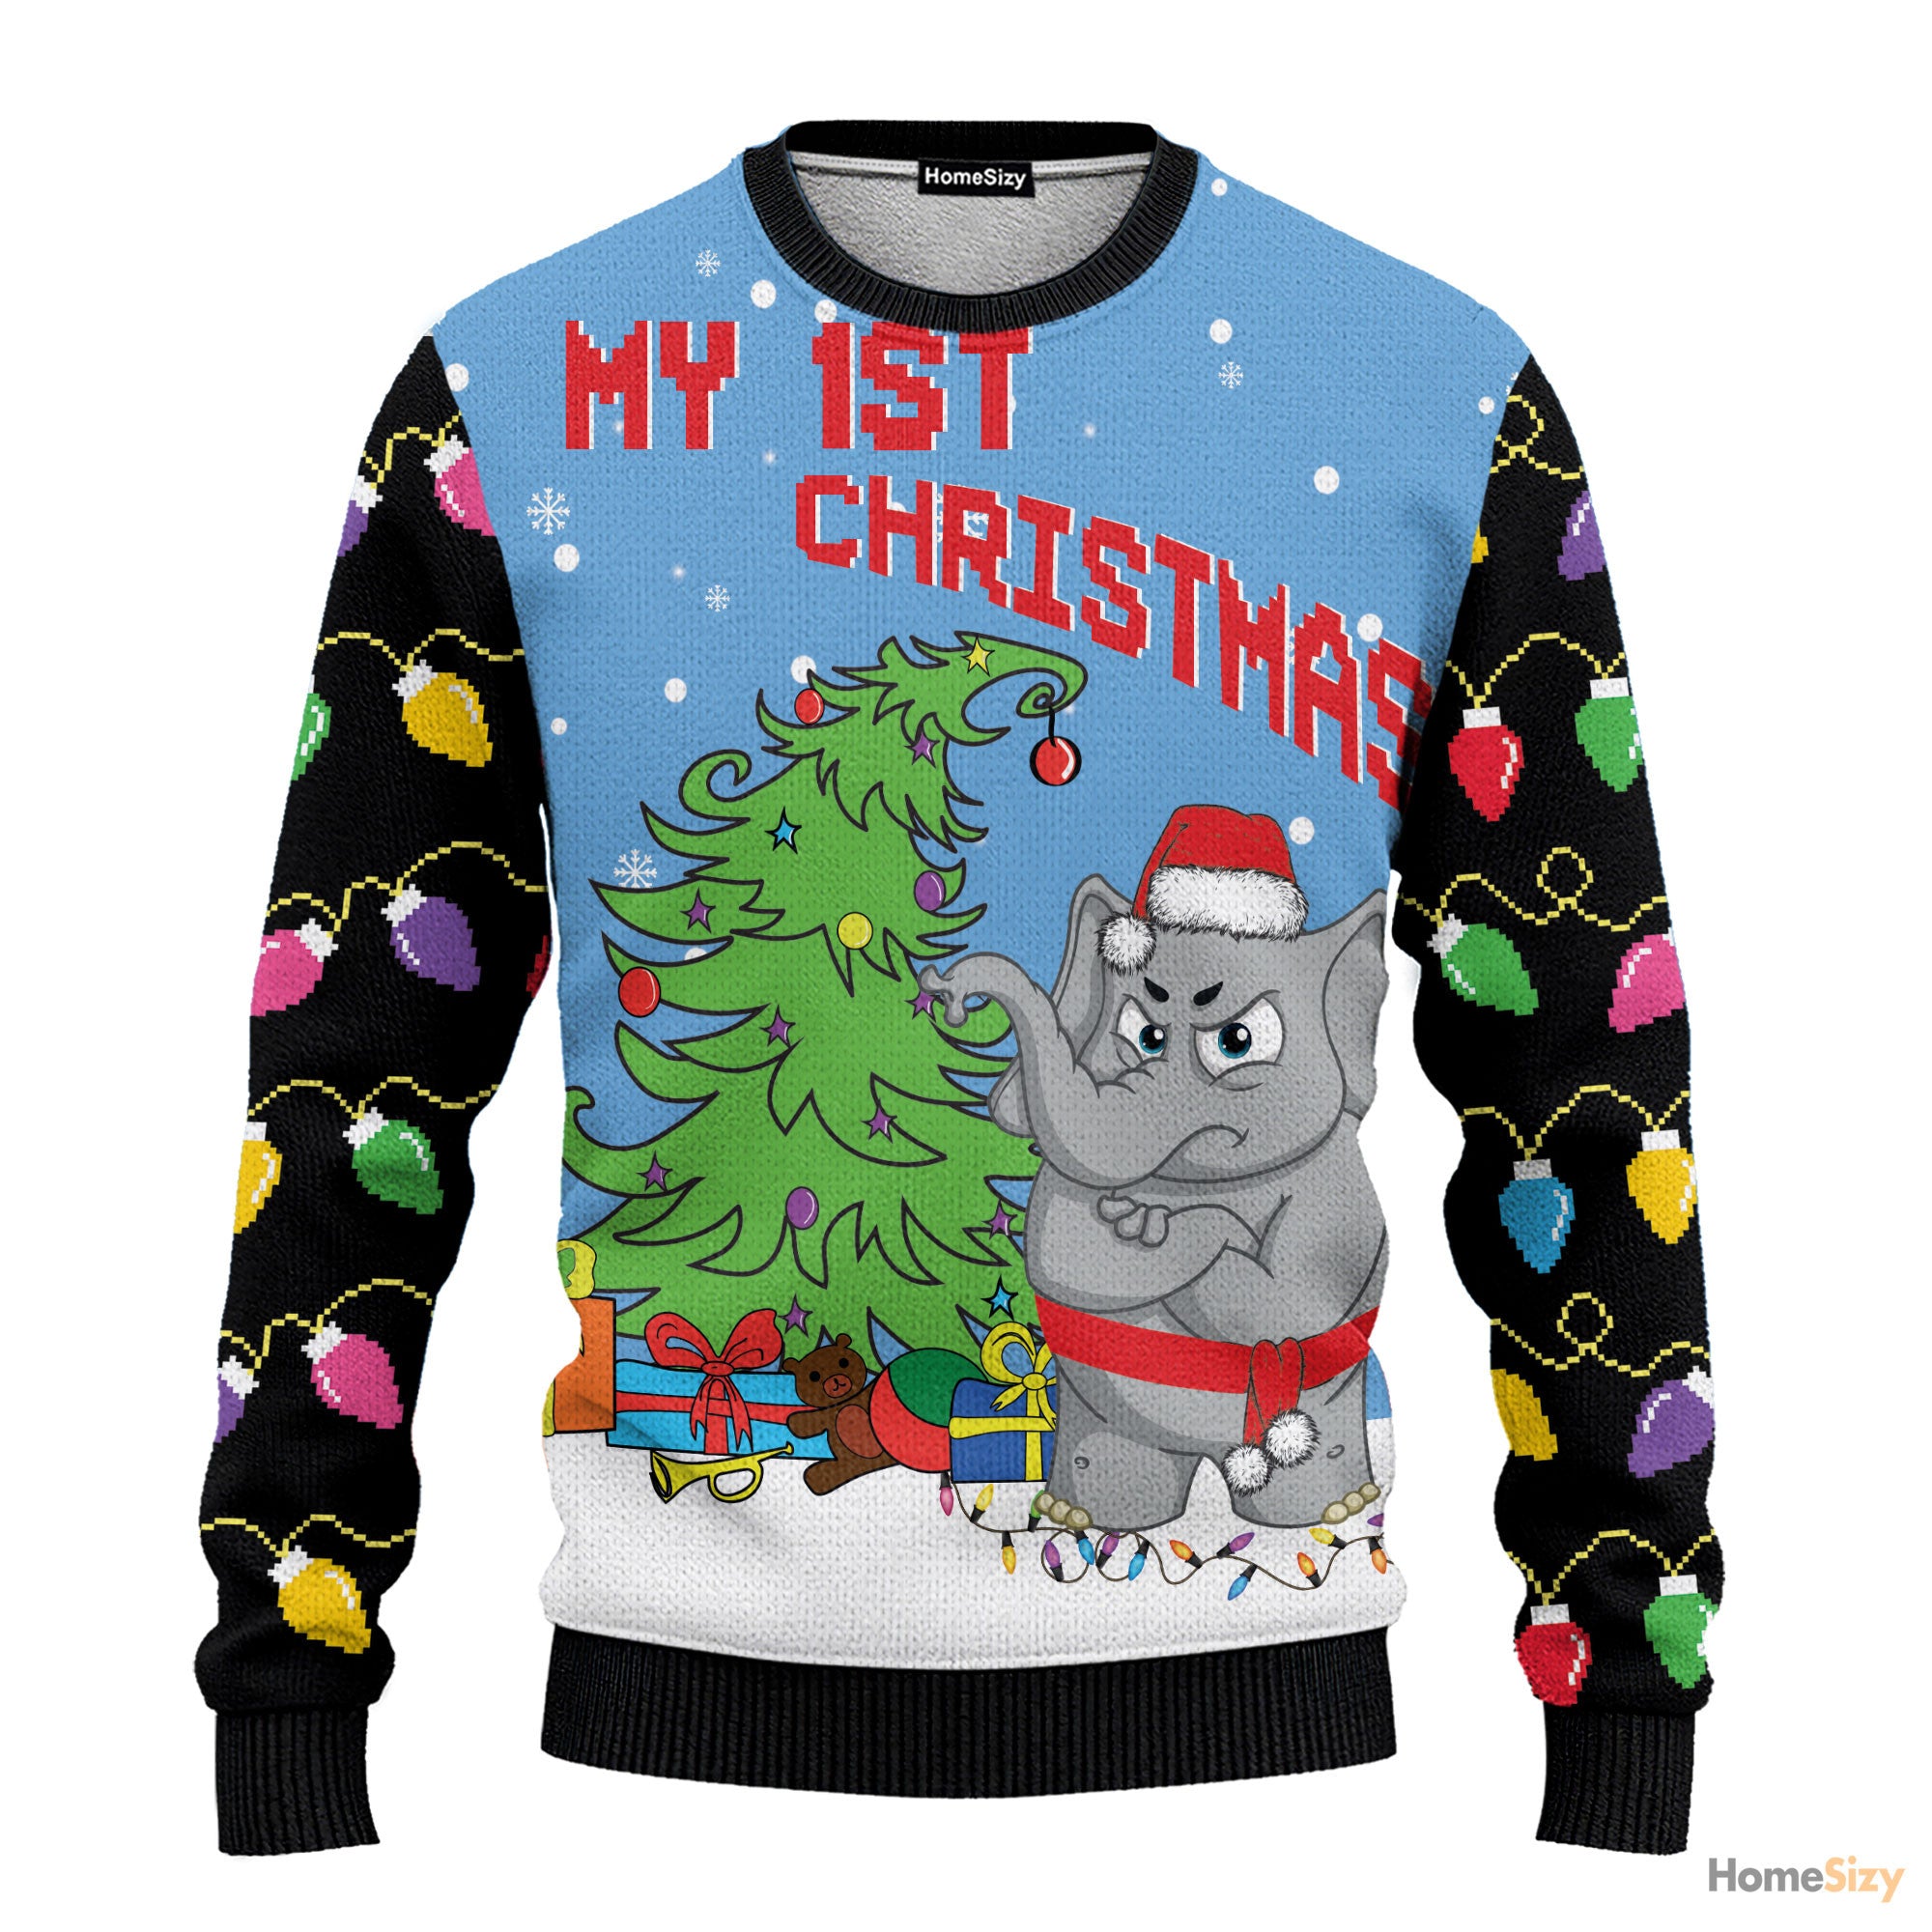 Printed 1st Elephant Ugly Sweater - Best Gift For Christmas